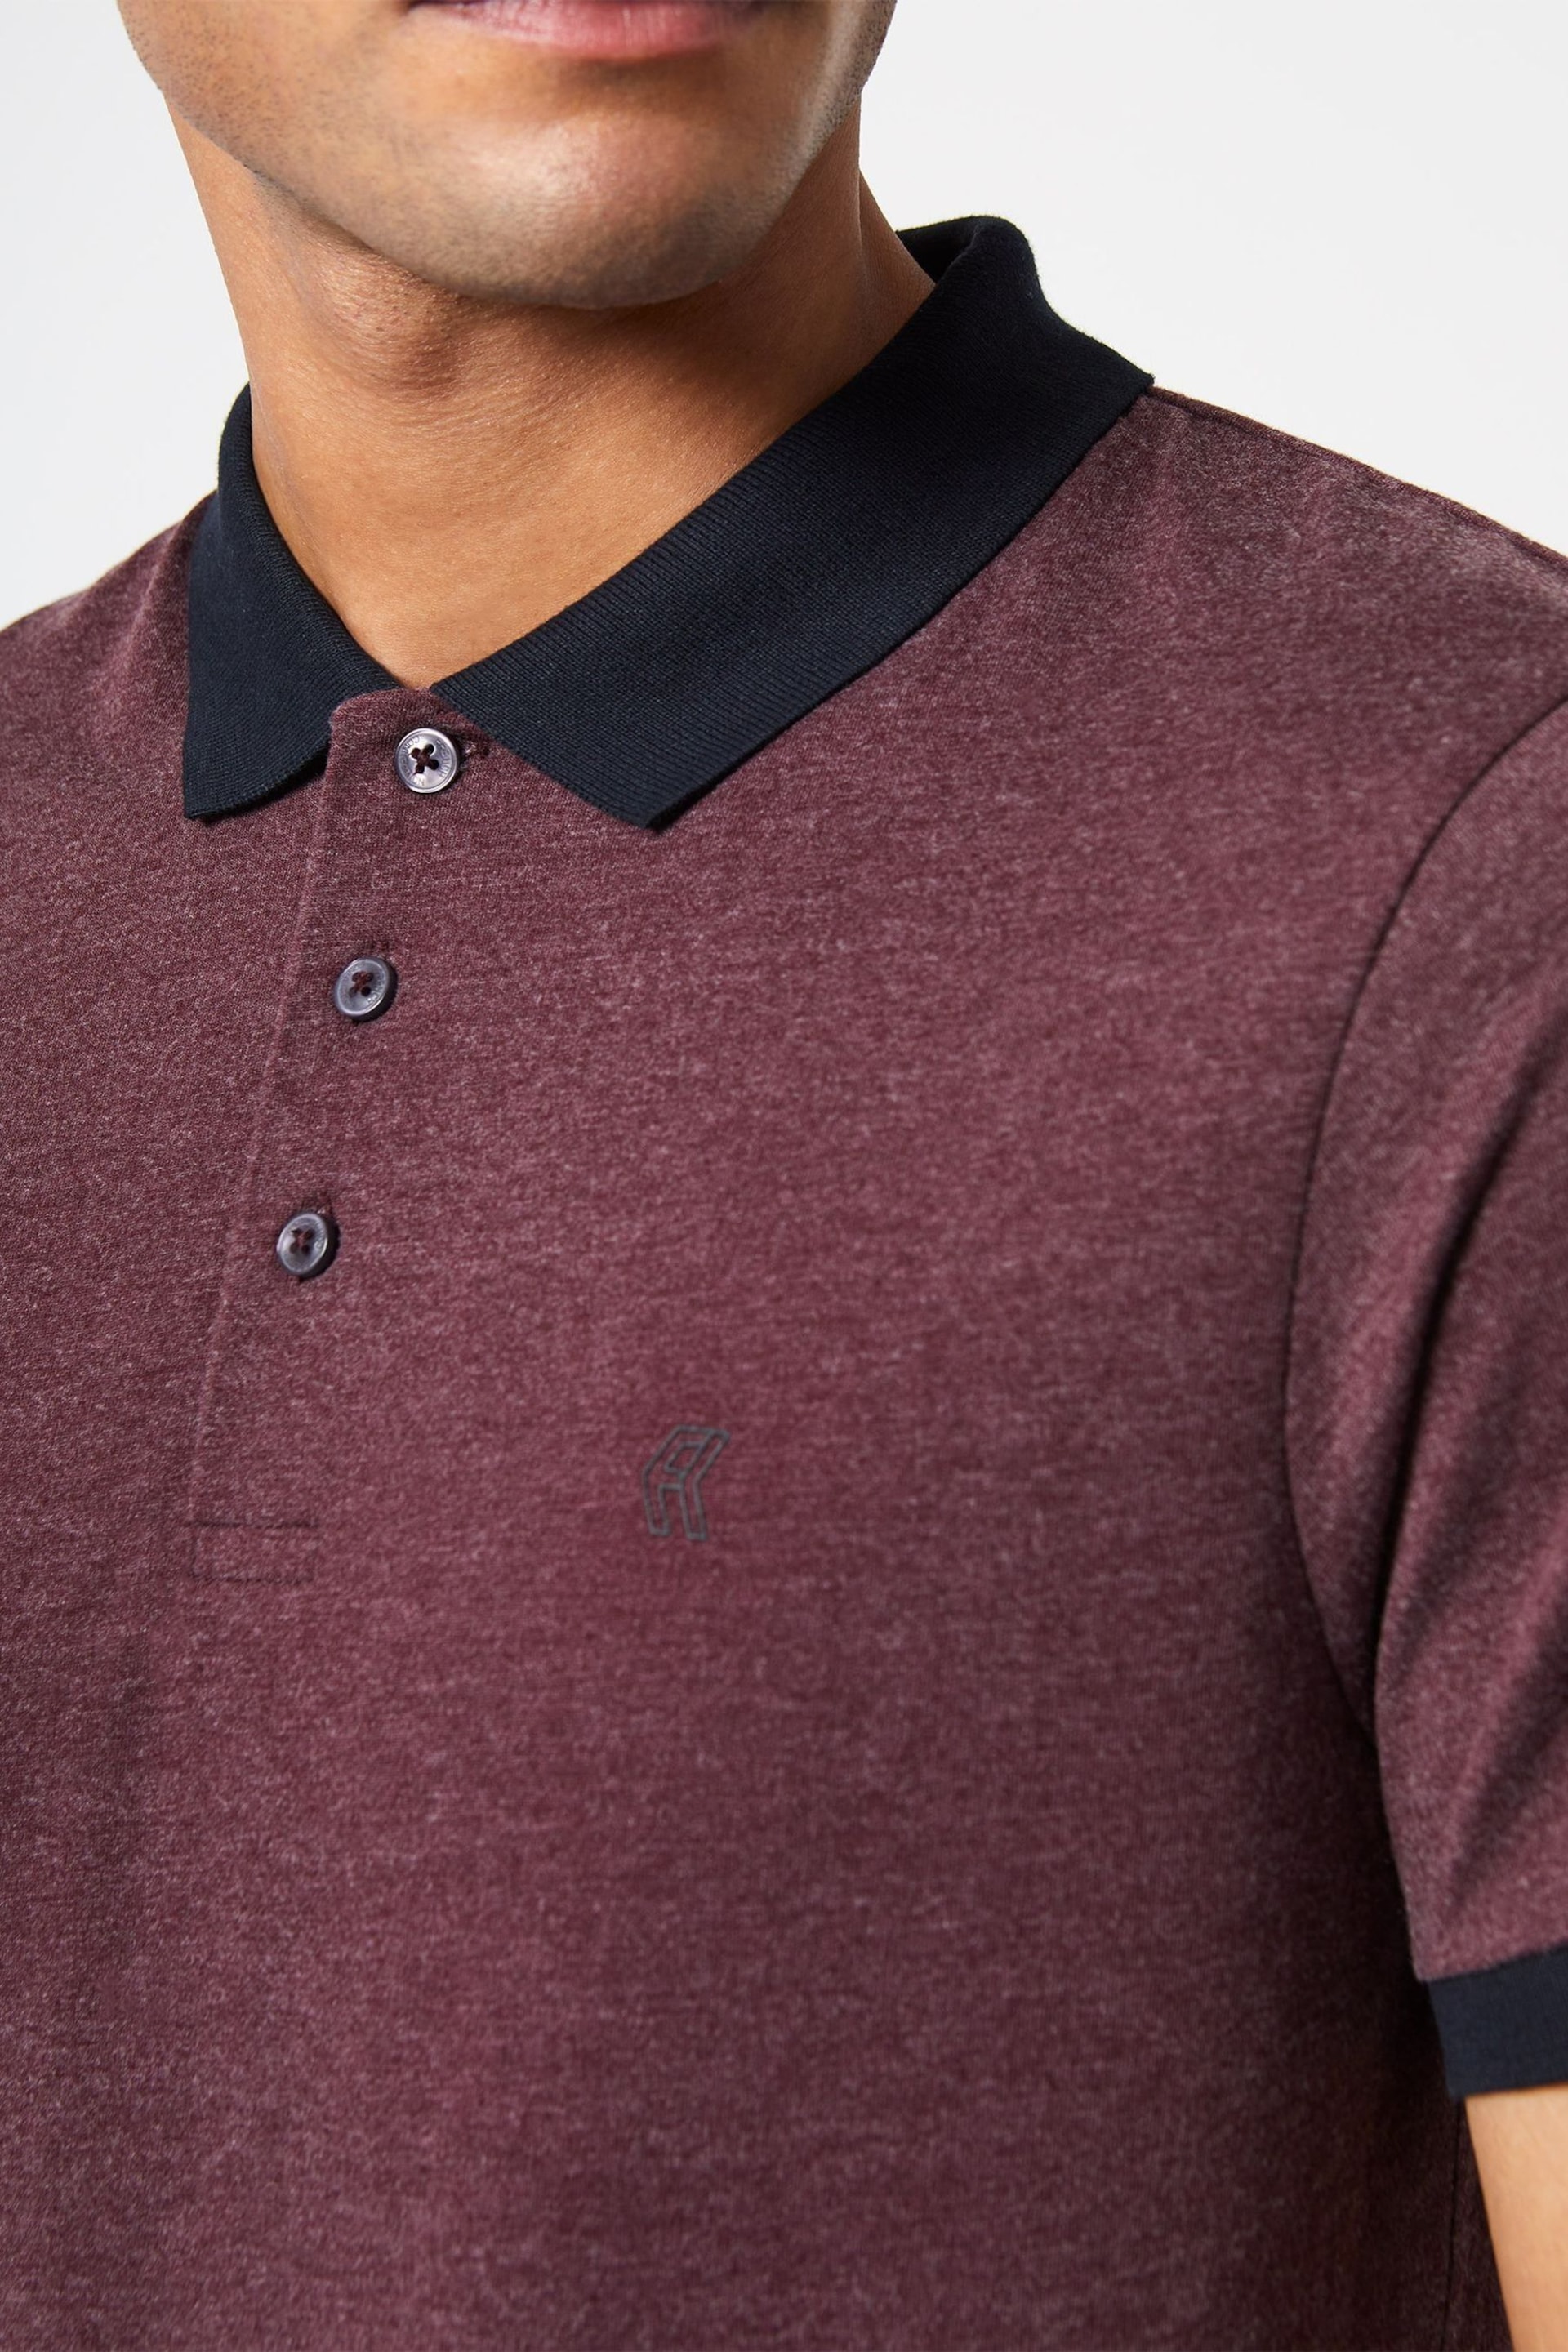 French Connection Contrast Collar Polo - Image 1 of 2